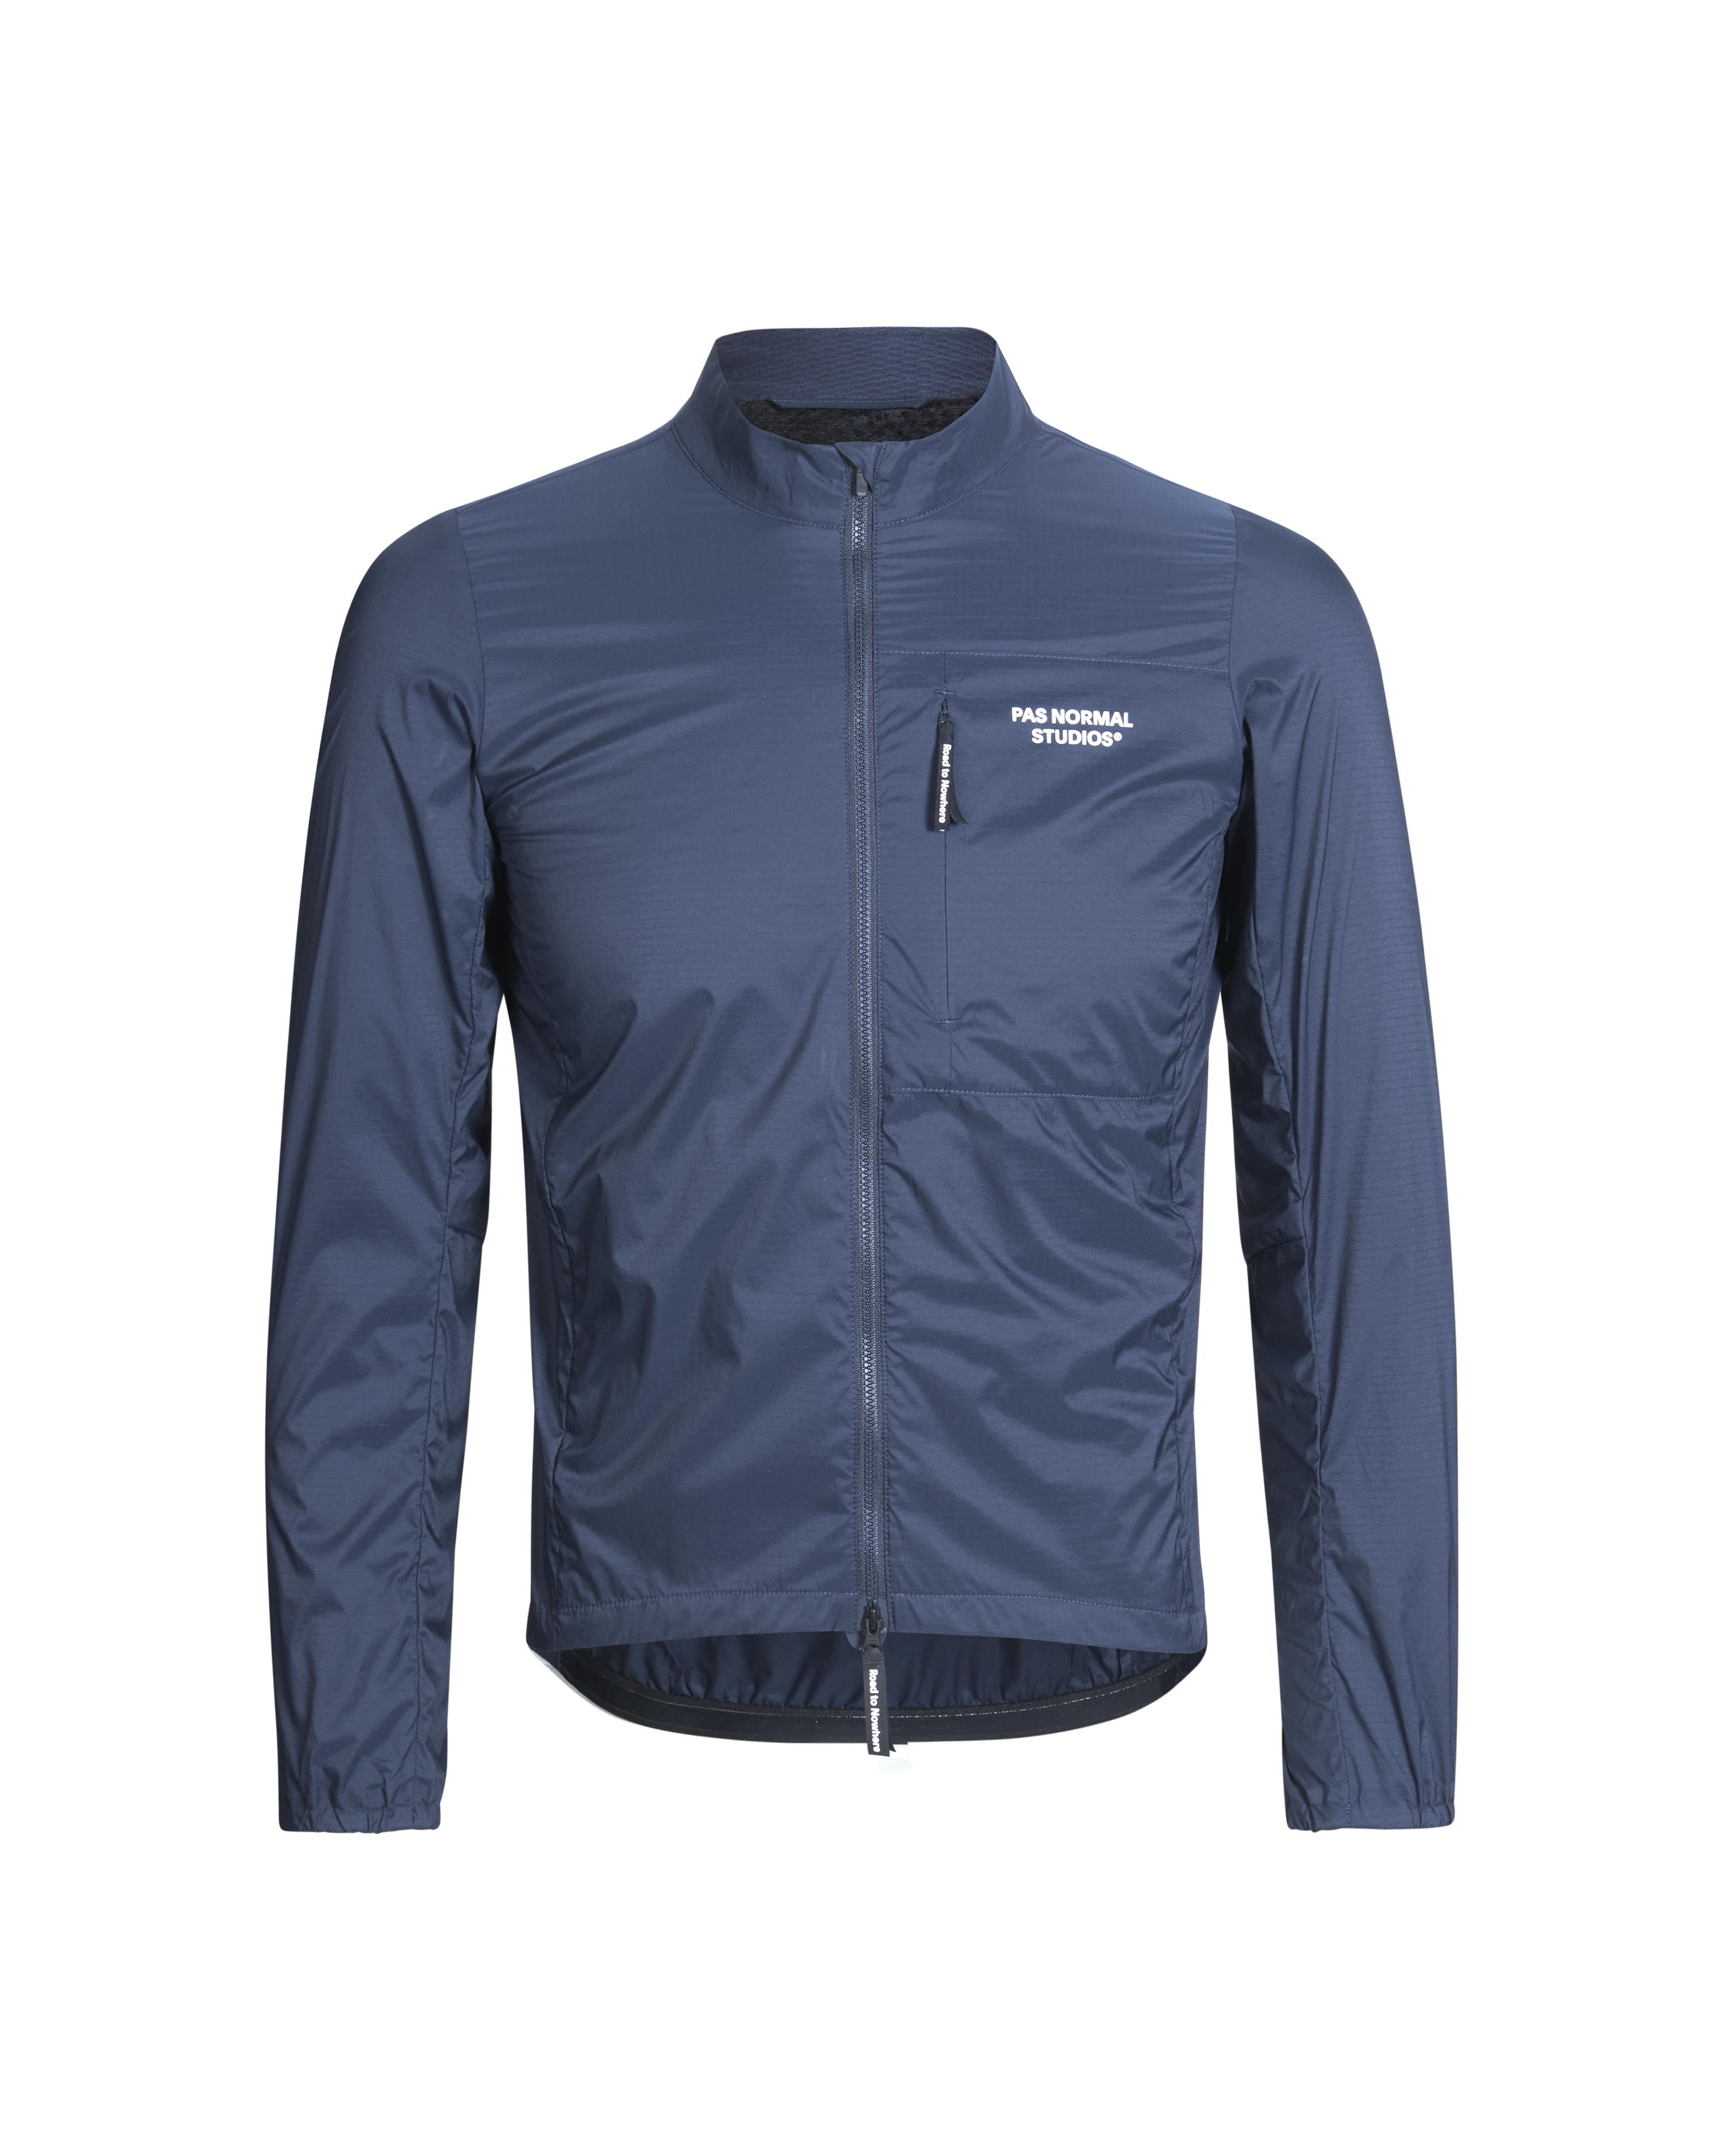 Men's Essential insulated Jacket